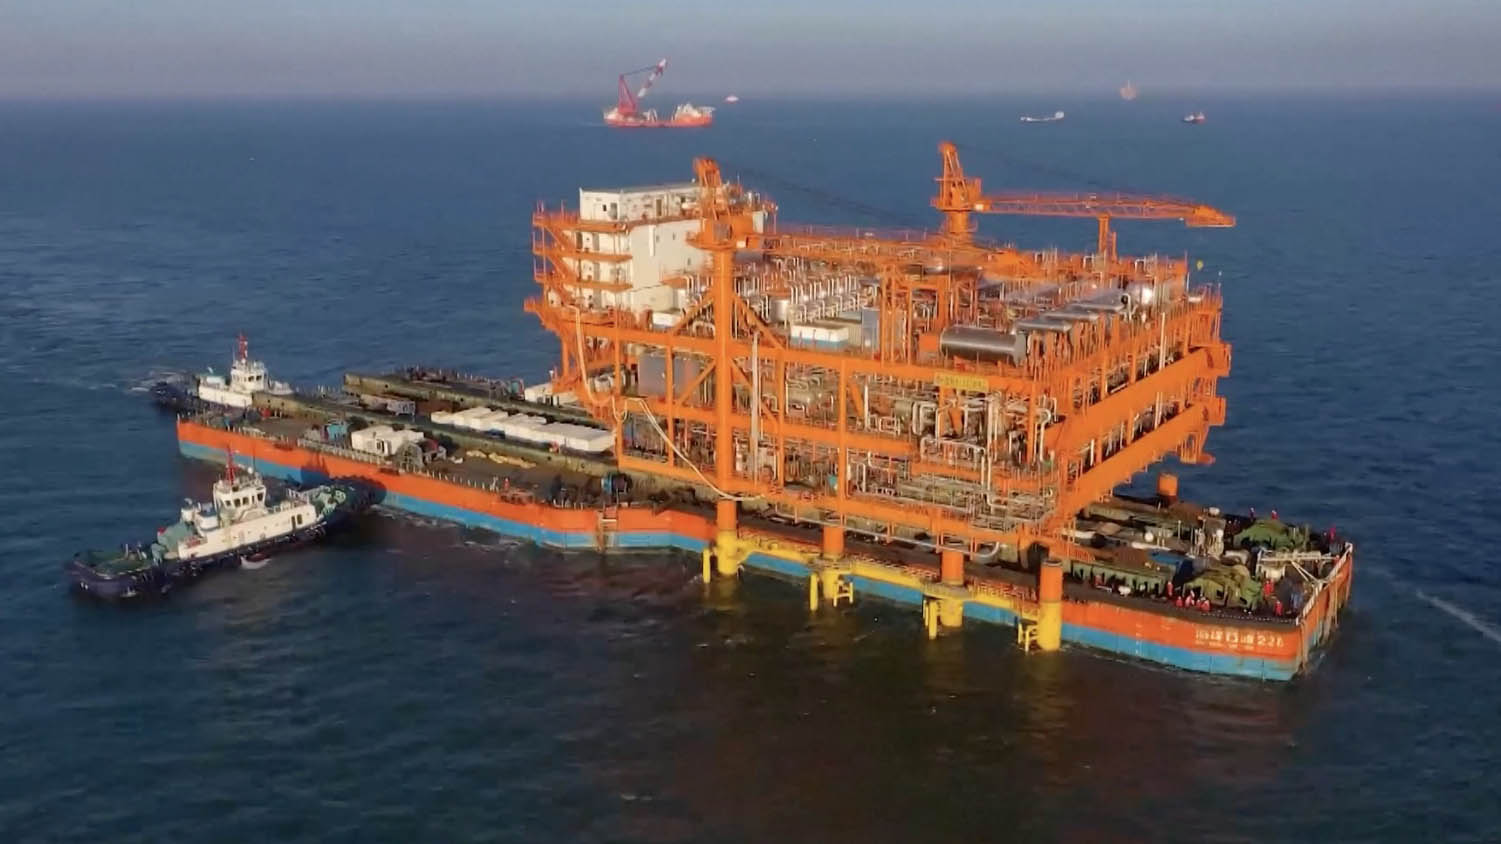 Major Chinese offshore oil platform completes floatover installation